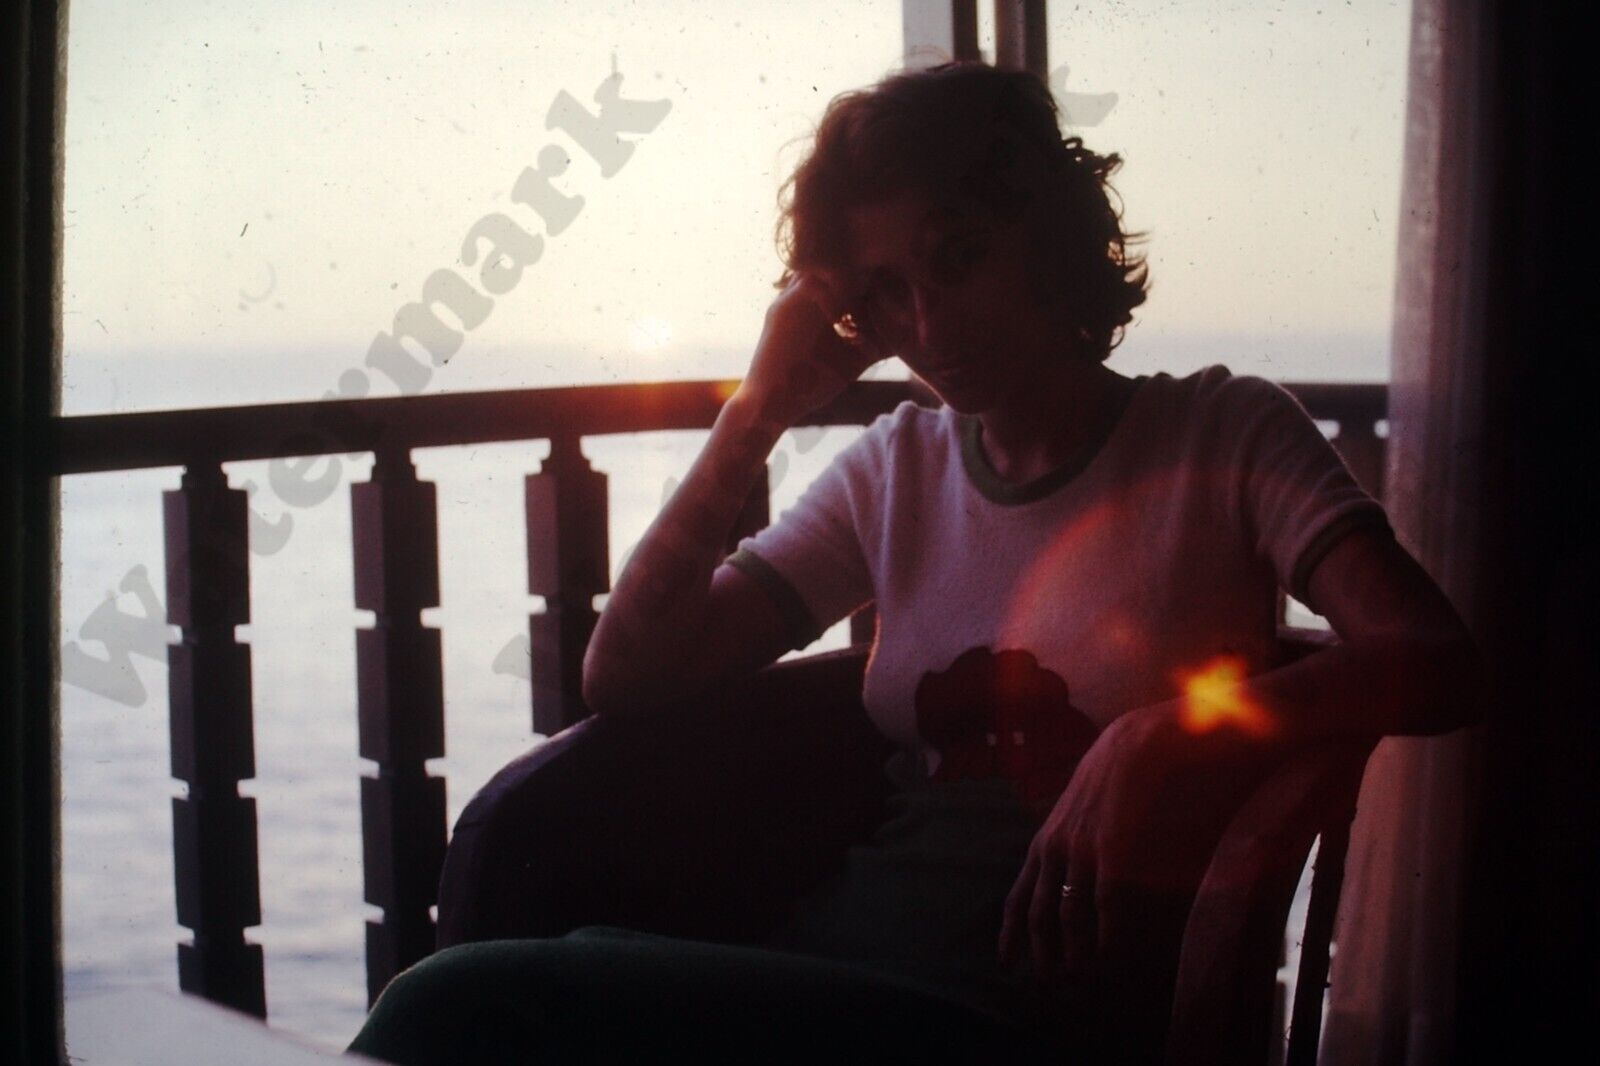 1975 candid of busty brunette woman in white shirt Vintage SLIDE A4m10